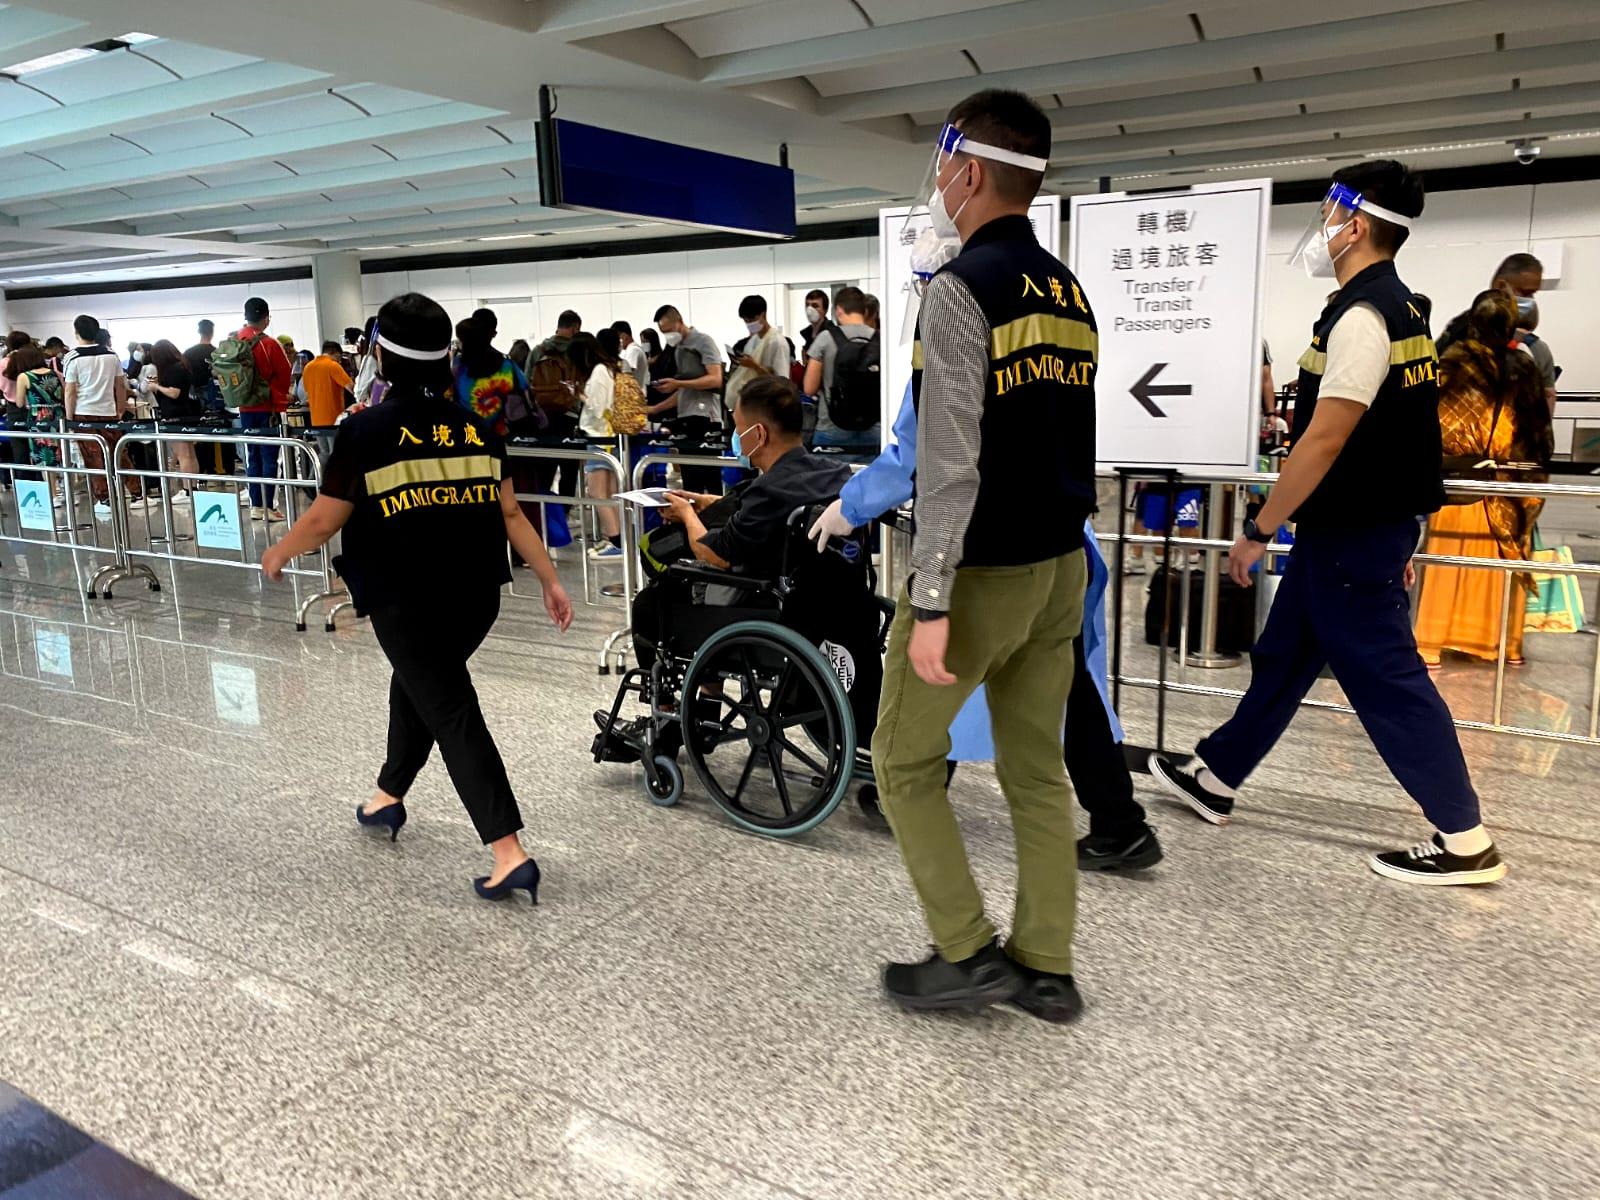 An assistance seeker safely arrived at Hong Kong International Airport today (August 22). Photo shows Immigration staff providing assistance on site.